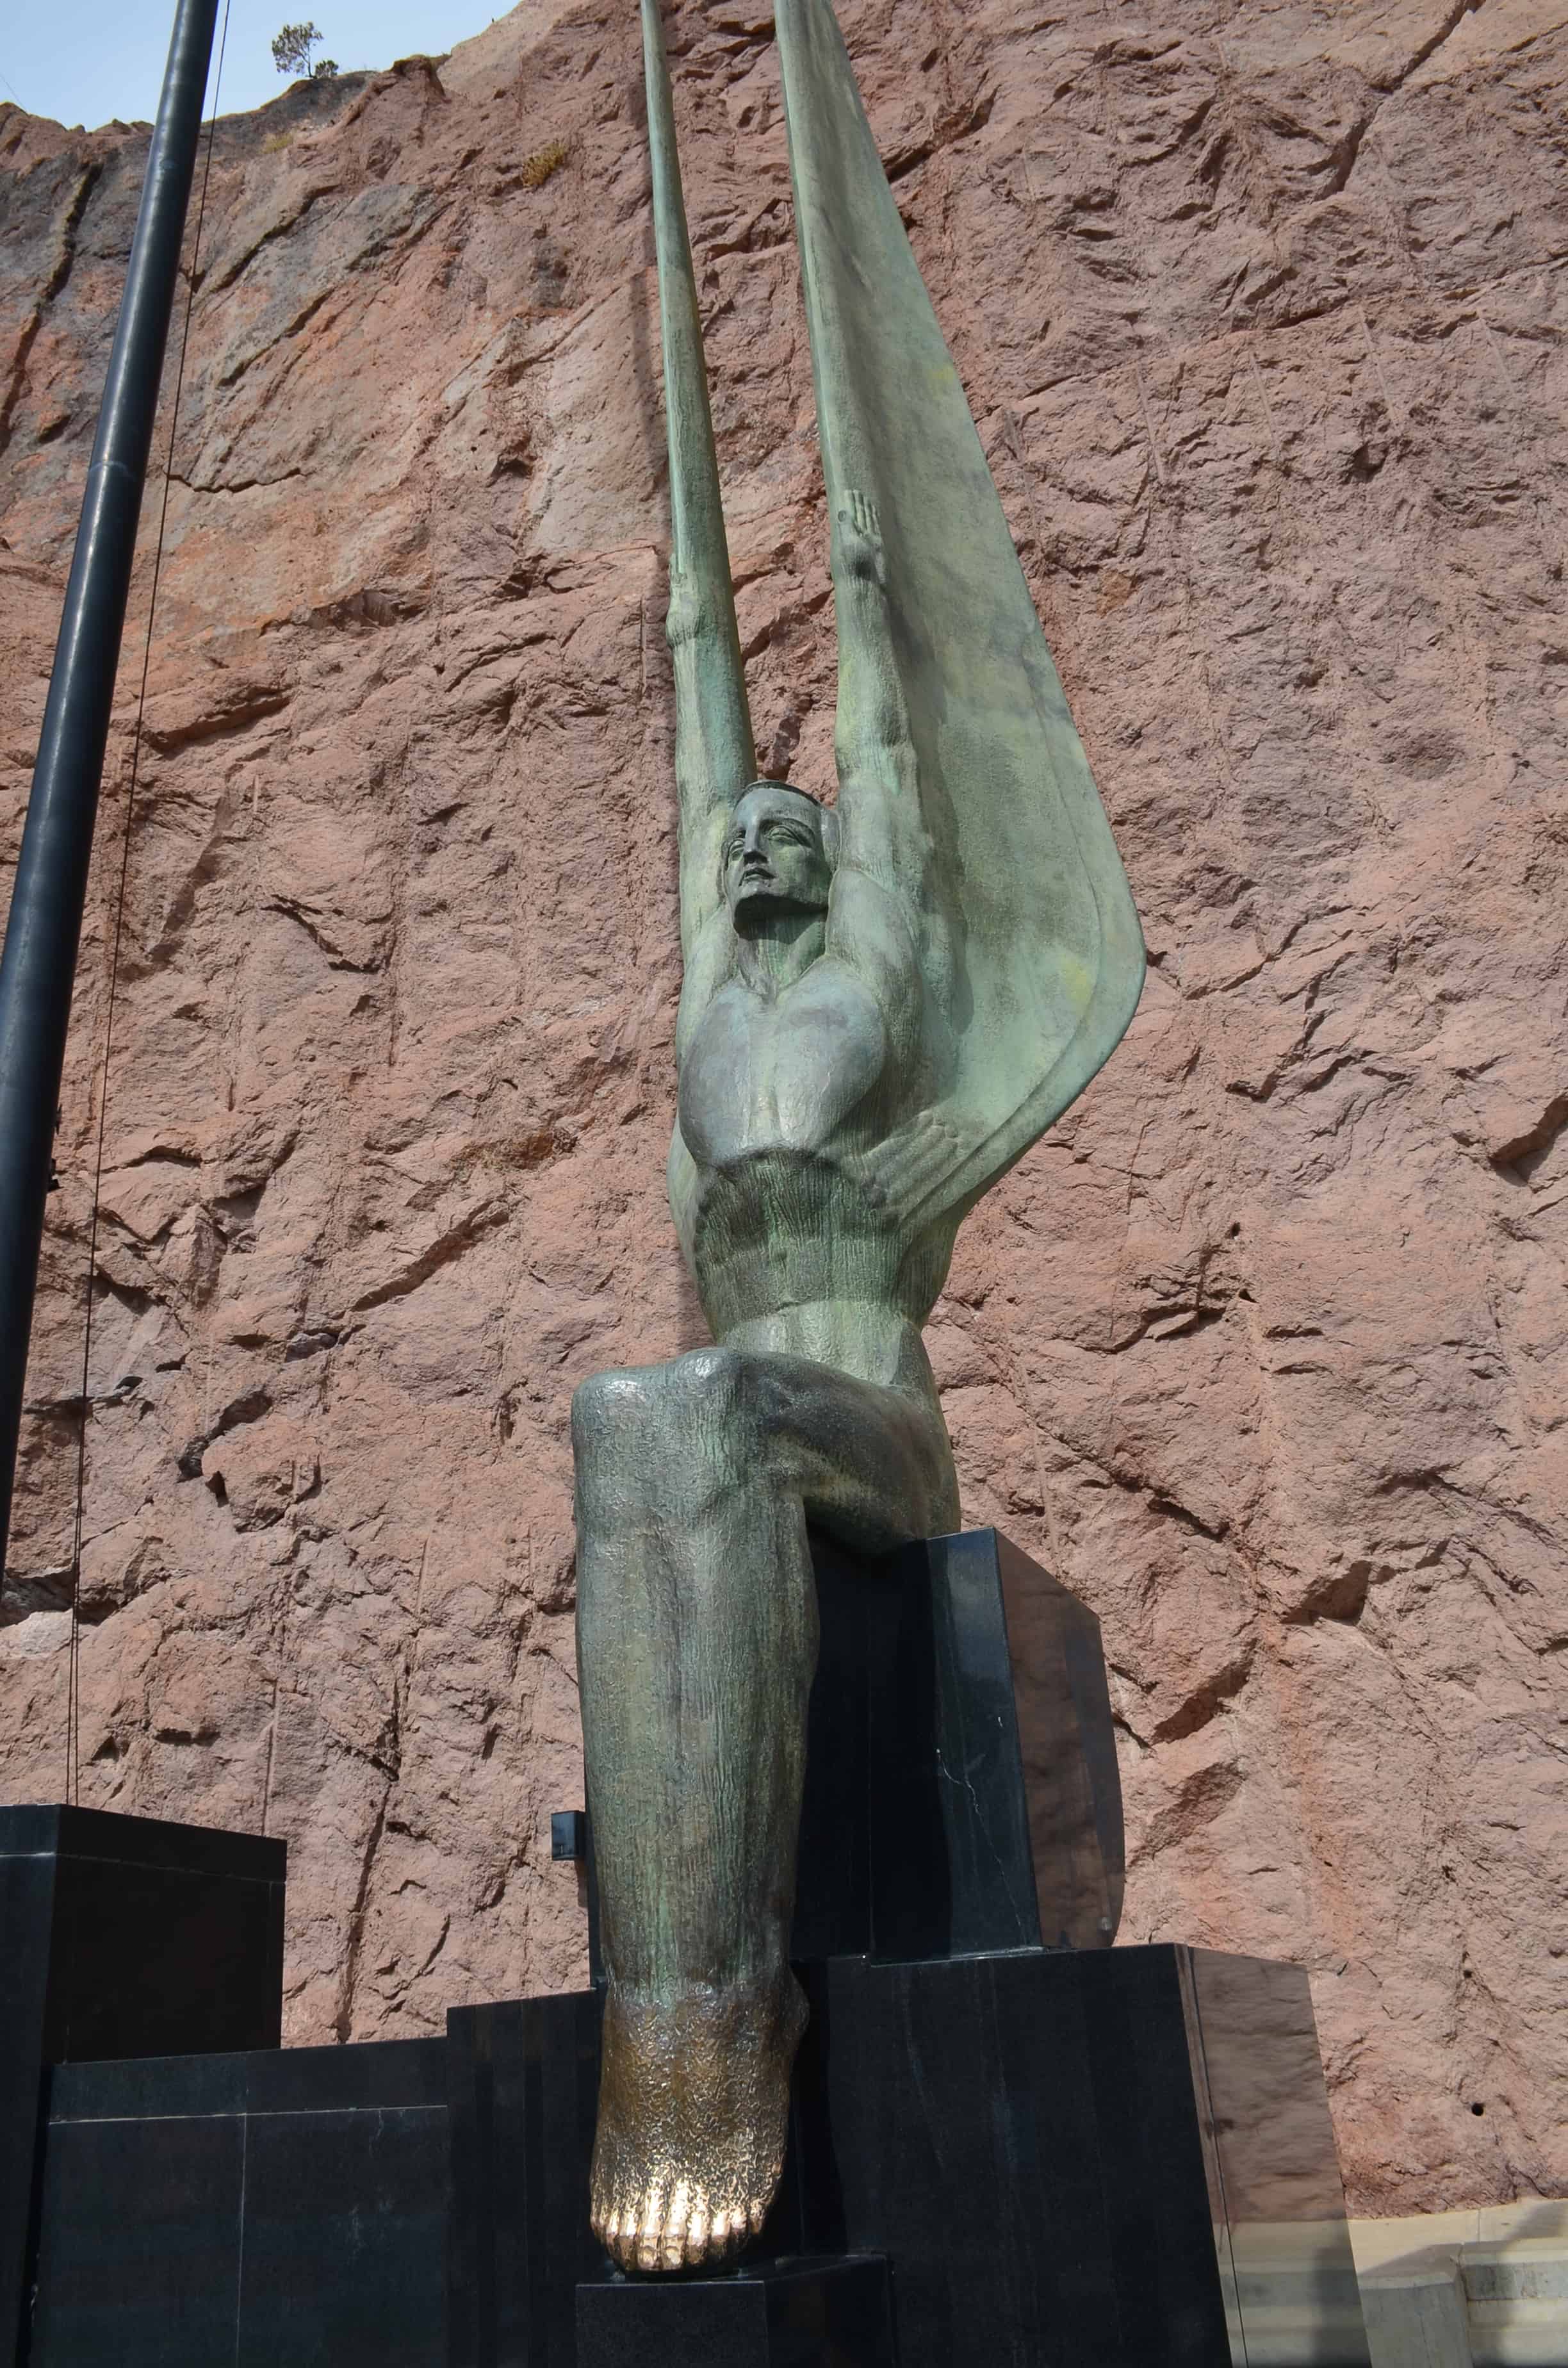 One of the winged figures on the Winged Figures of the Republic monument at Hoover Dam in Nevada